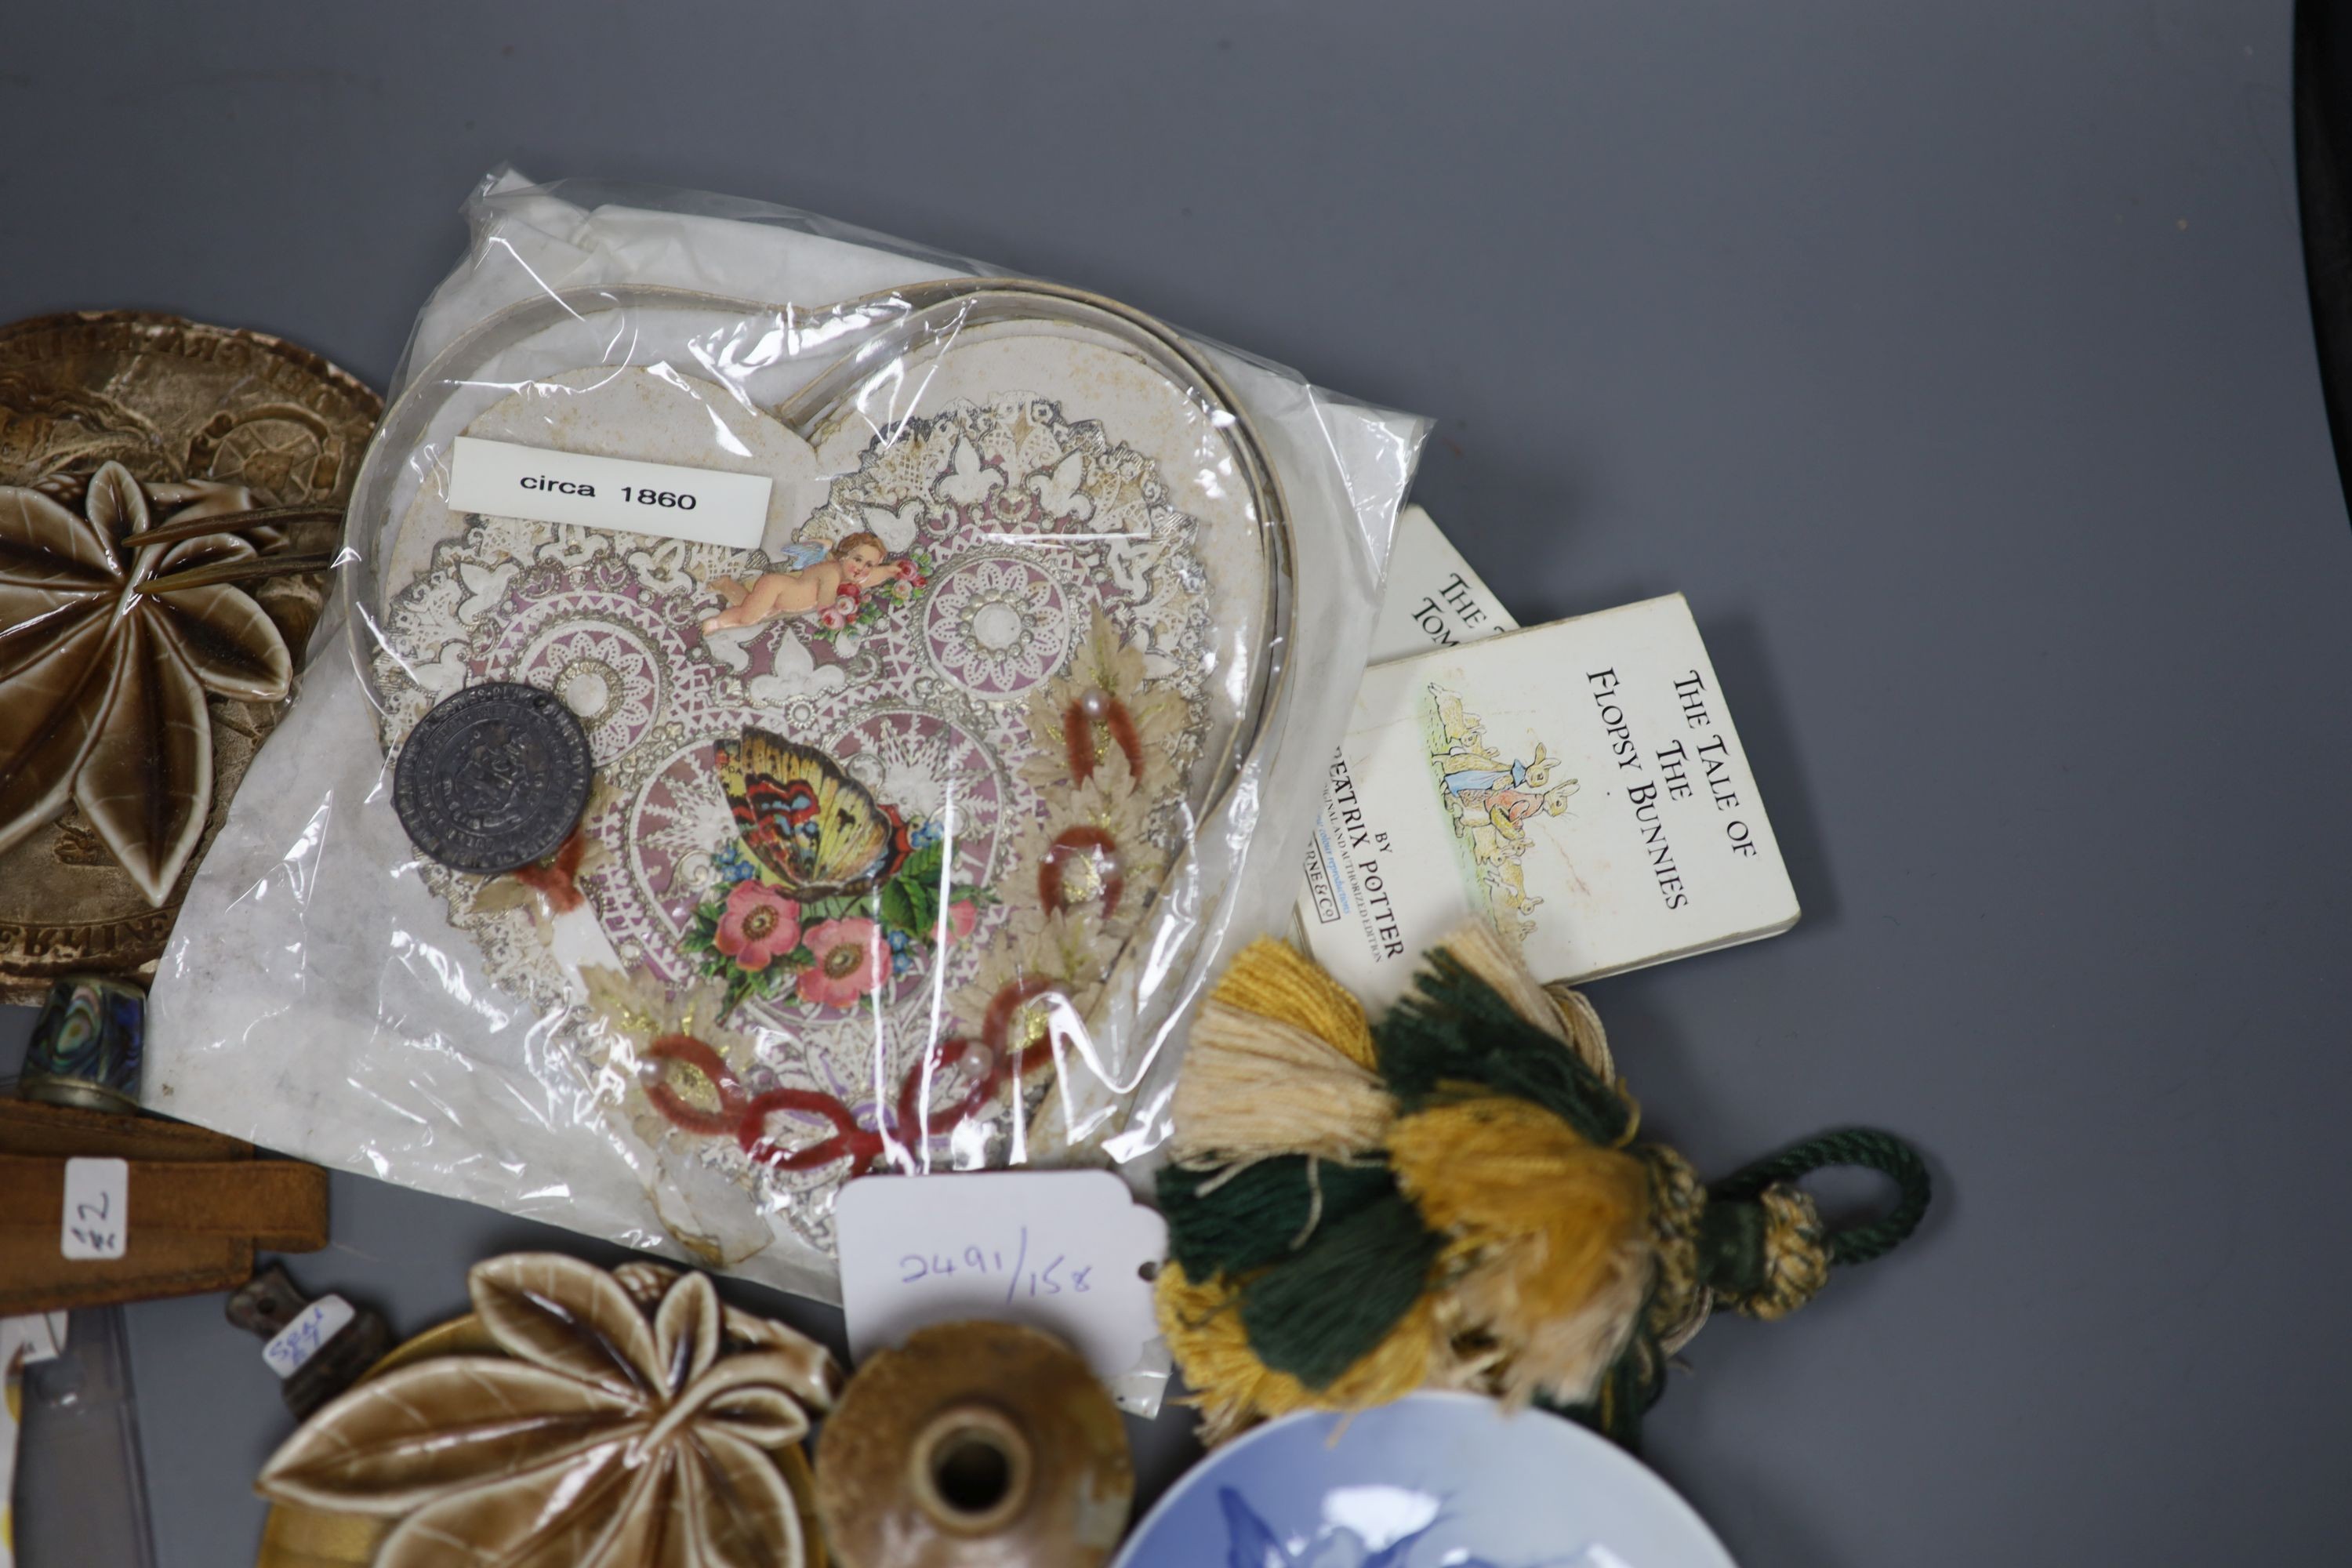 A 19th century valentine card, six pence pieces and mixed collectables